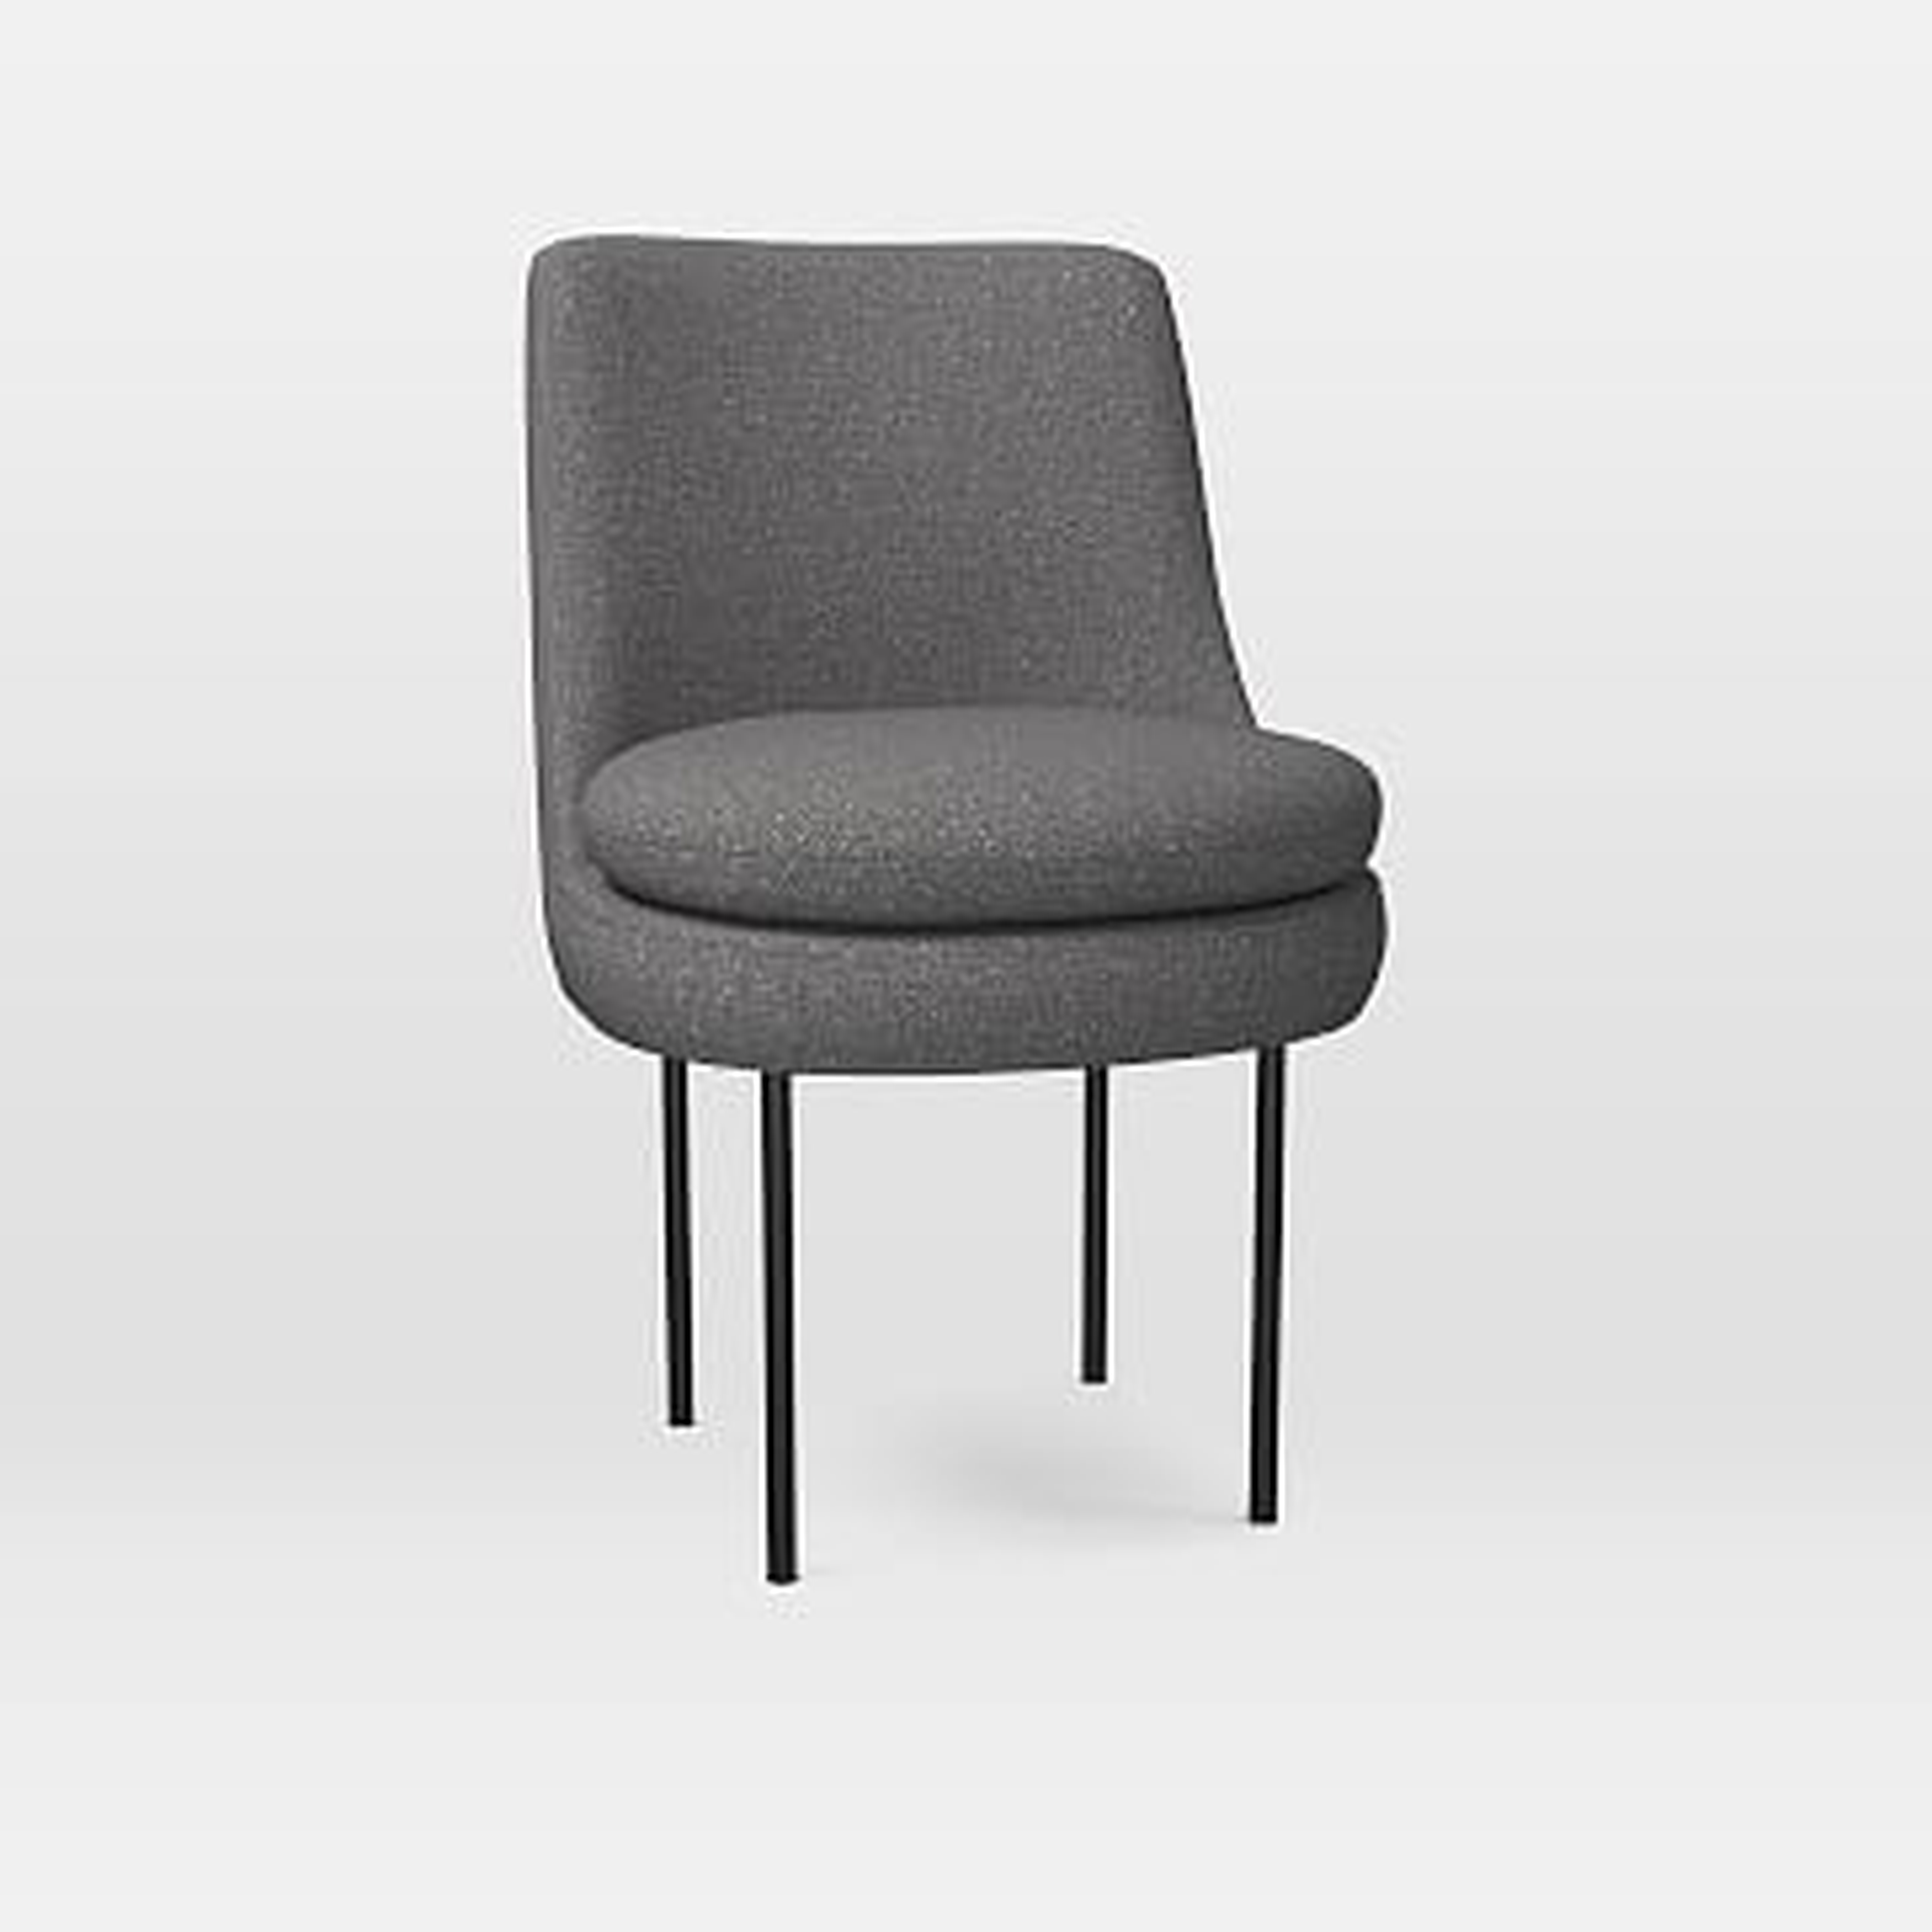 Modern Curved Dining Chair, Tweed, Salt And Pepper, Poly - West Elm